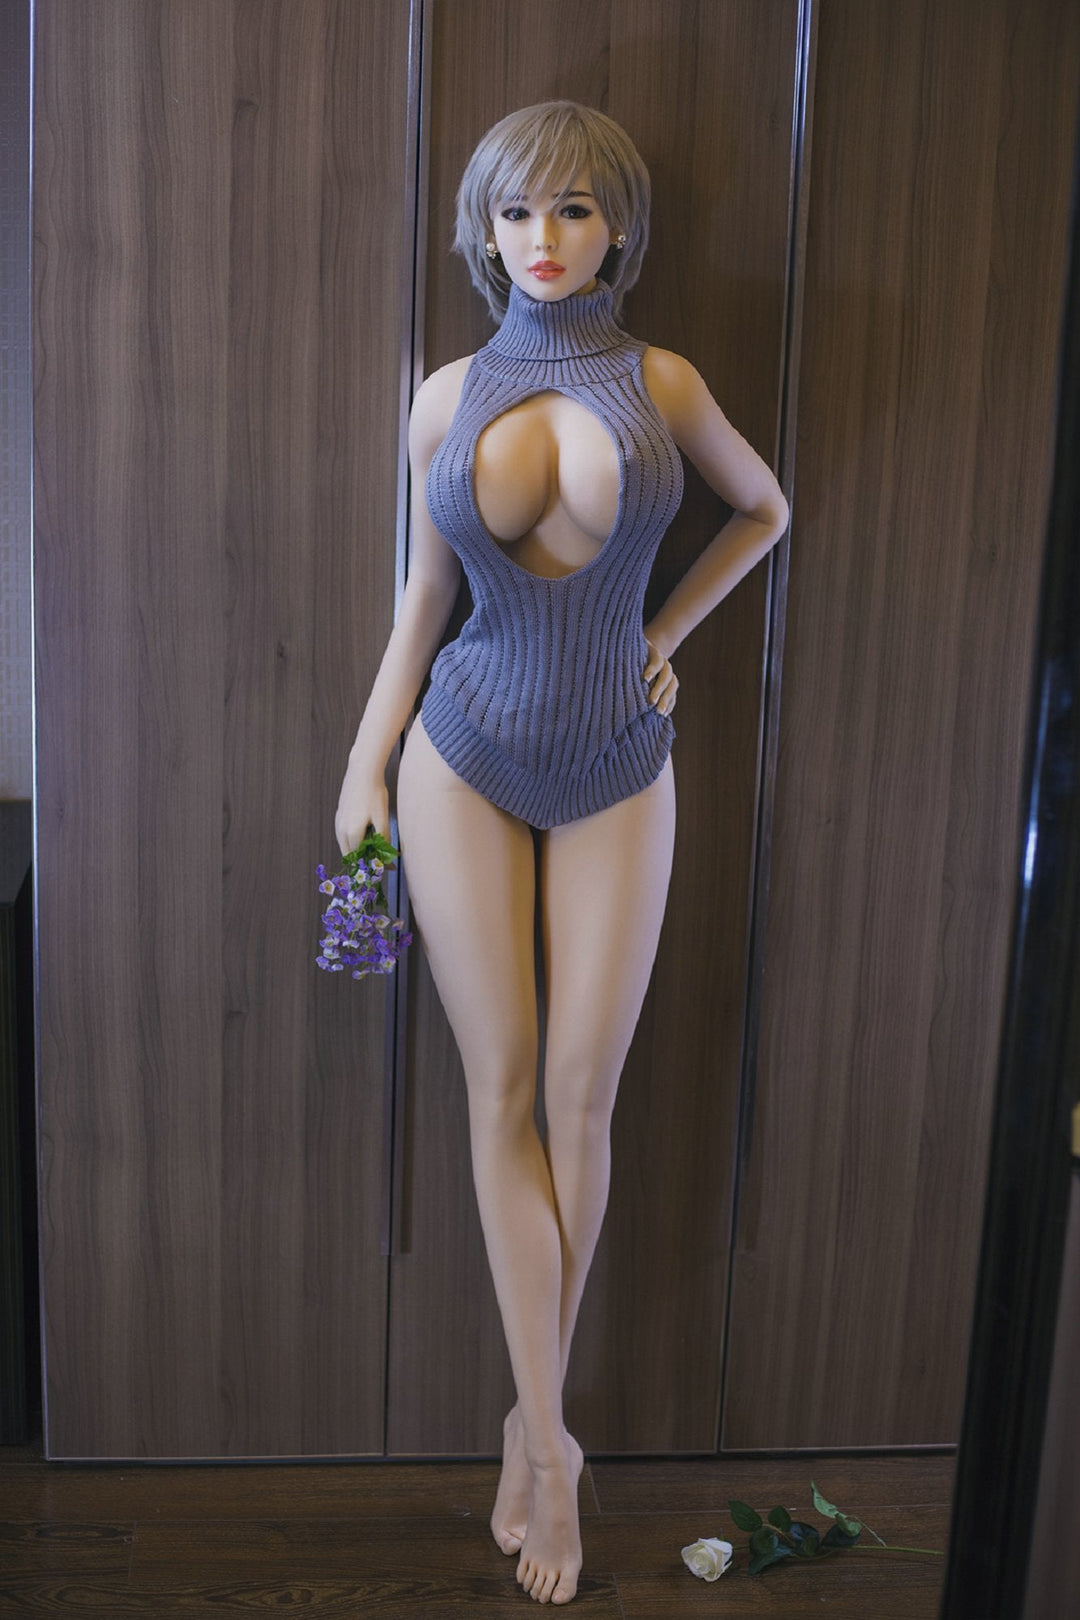 Ultra realistic Japanese TPE Sex Doll with Big Boobs - Kaito (3 sizes)